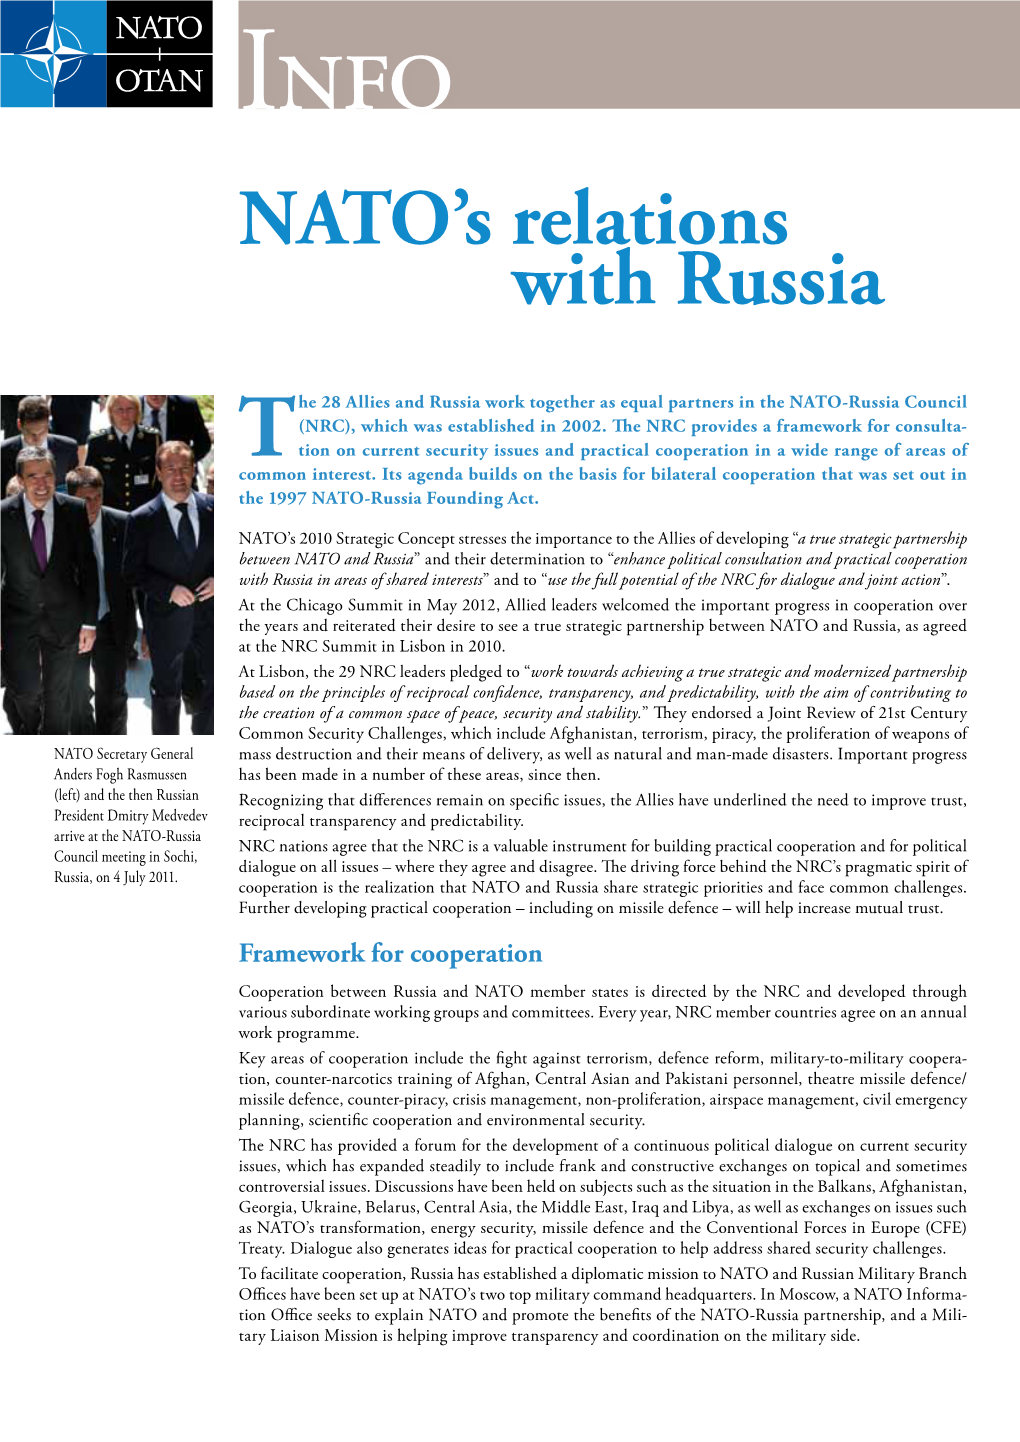 NATO's Relations with Russia